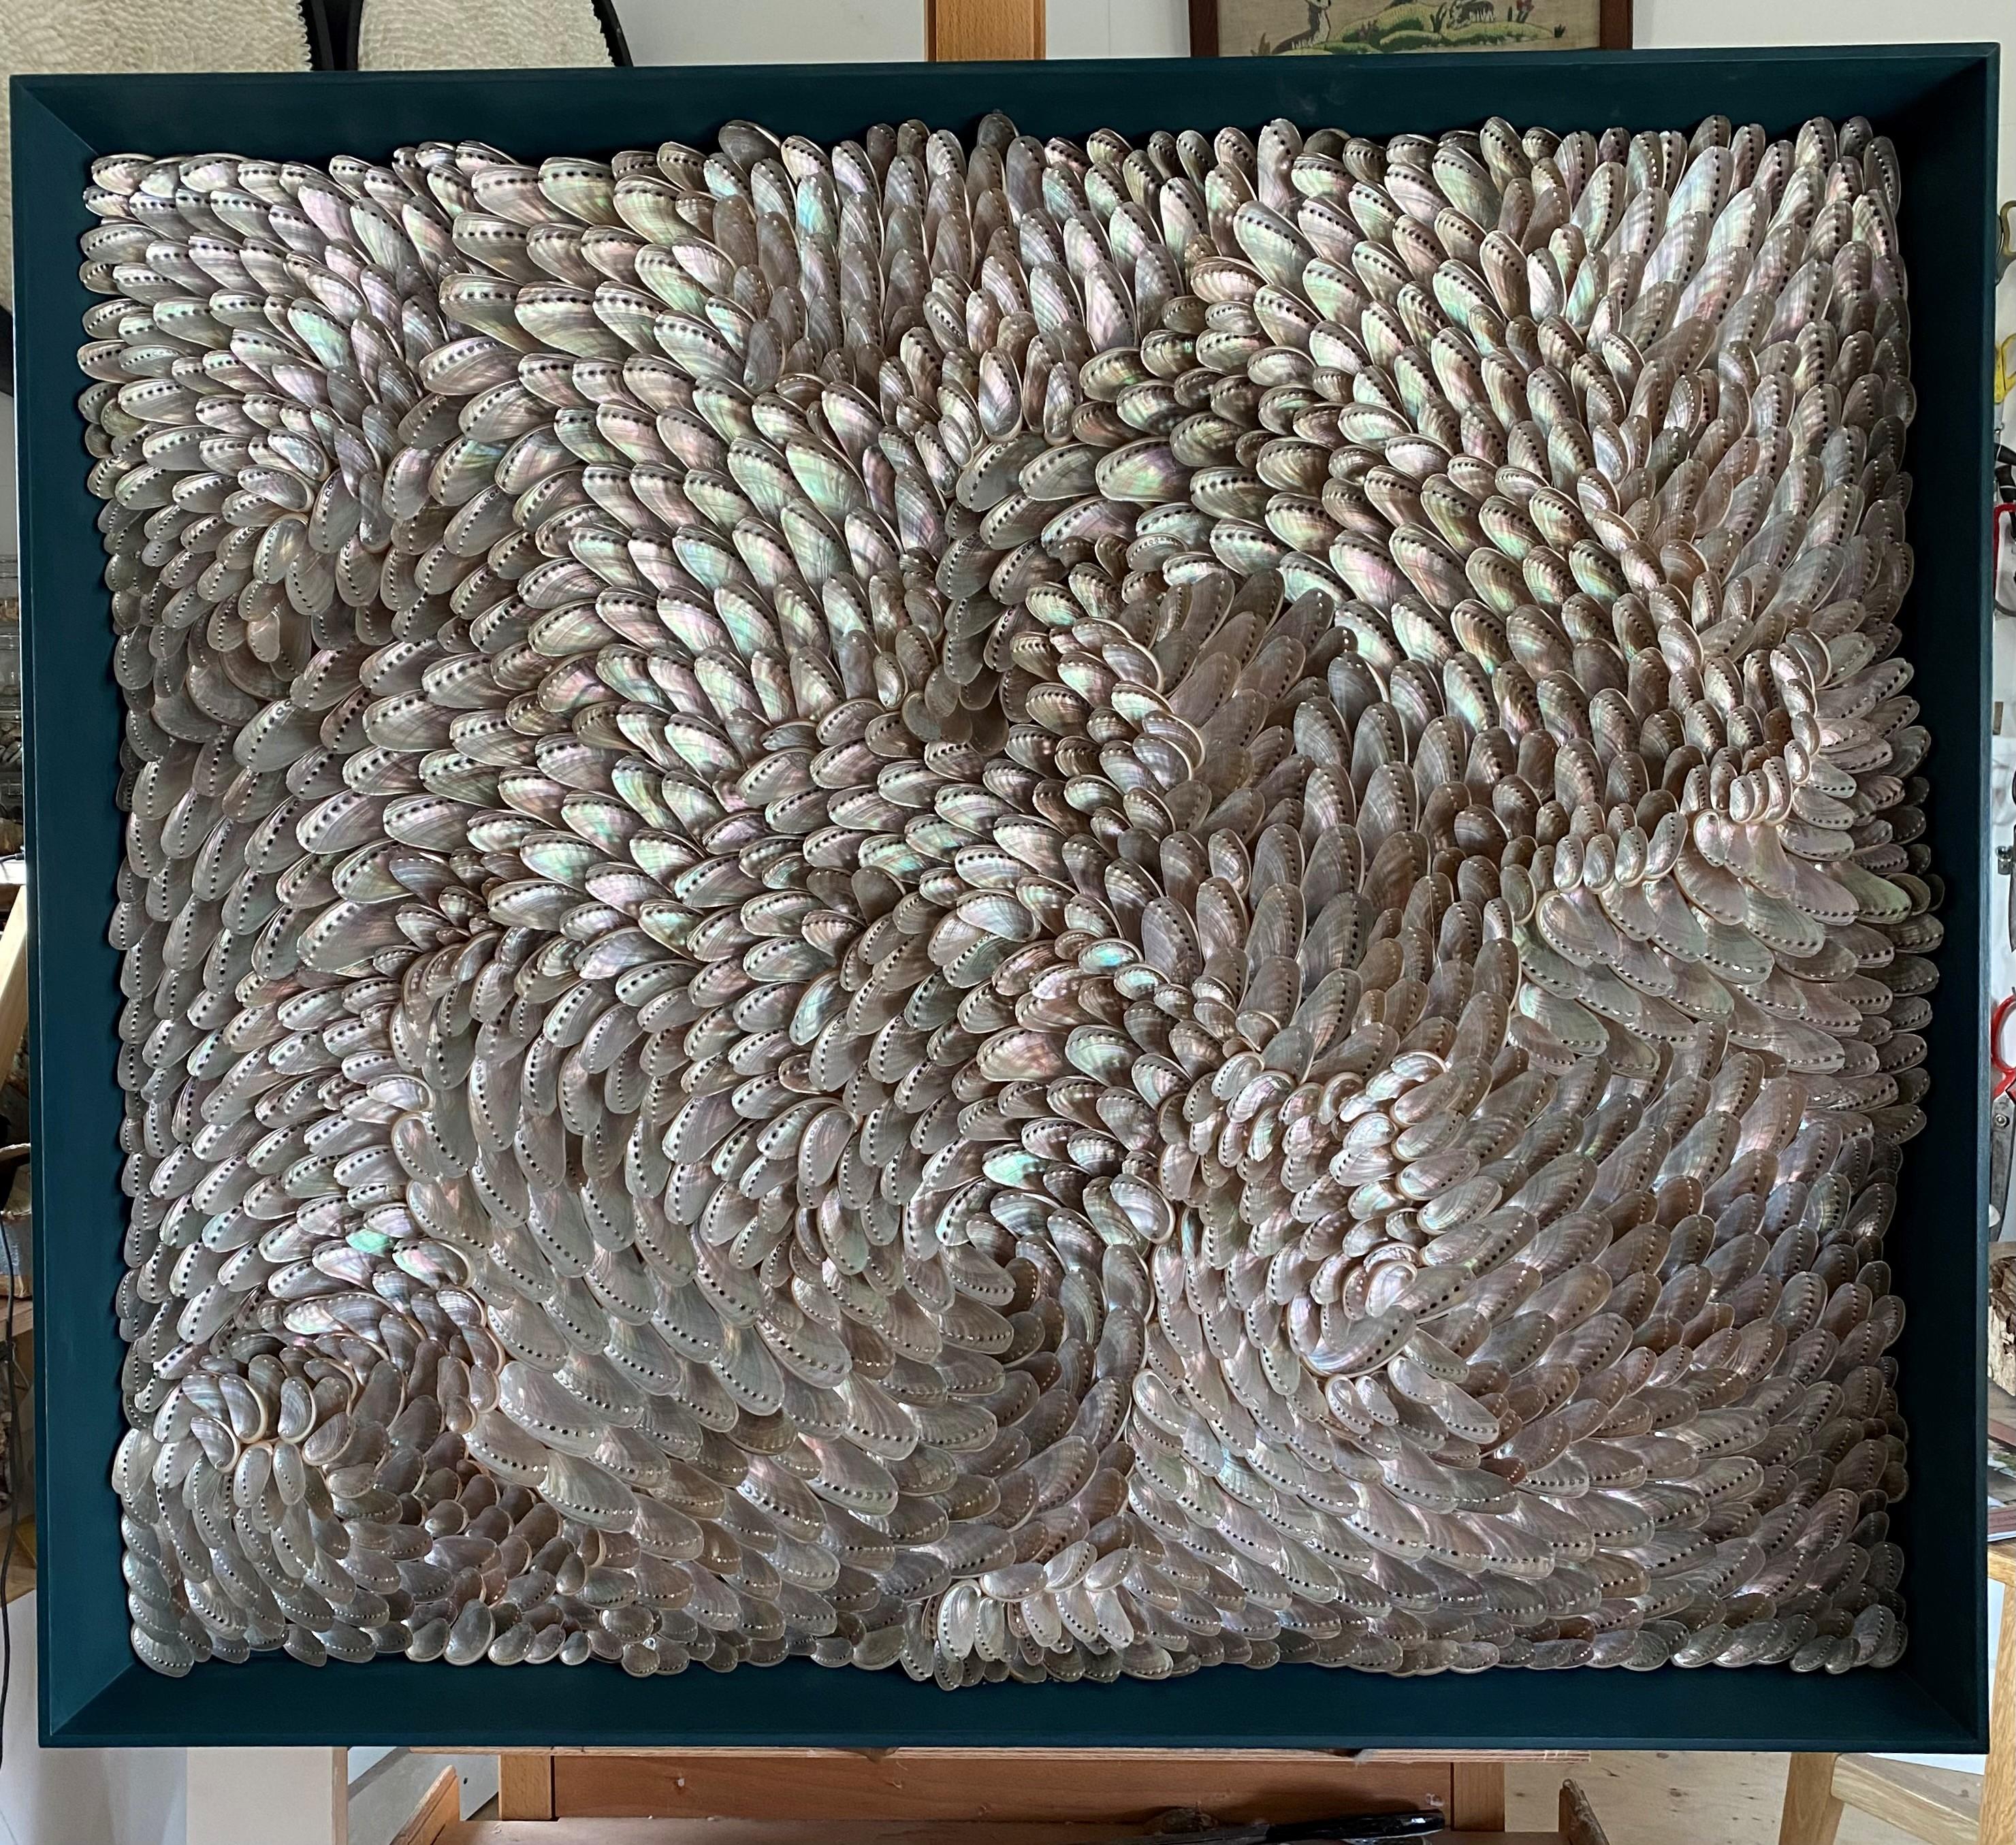 Art piece made with Donkey's Ear Abalone, framed.